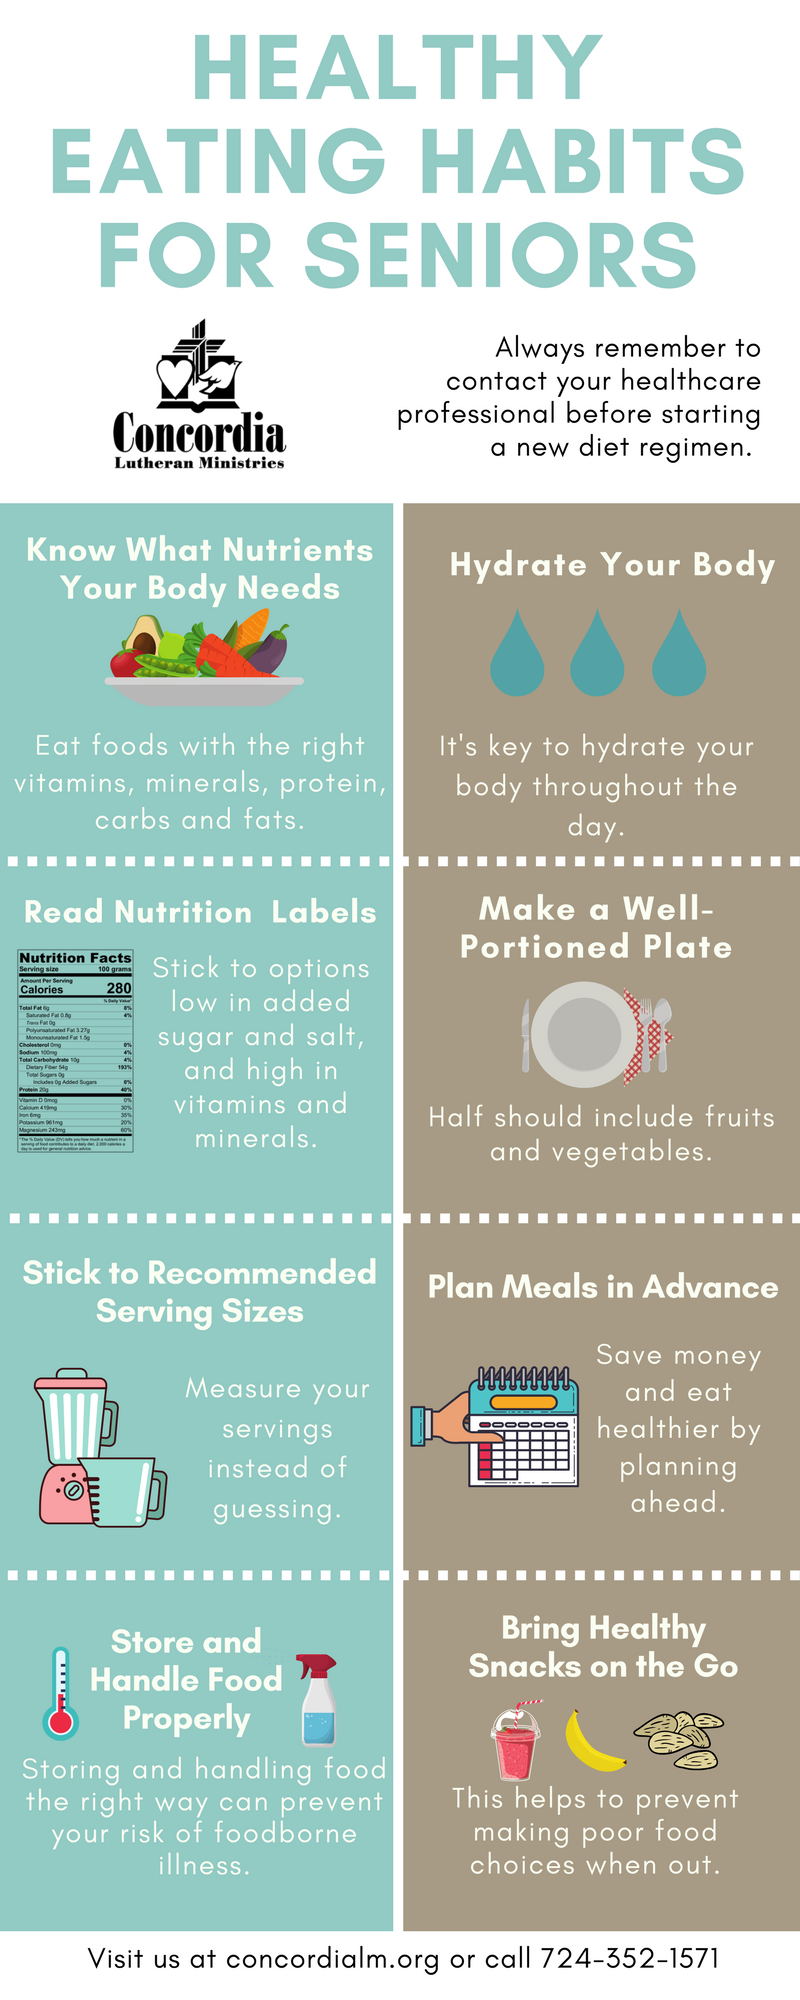 Healthy Eating Habits for Seniors